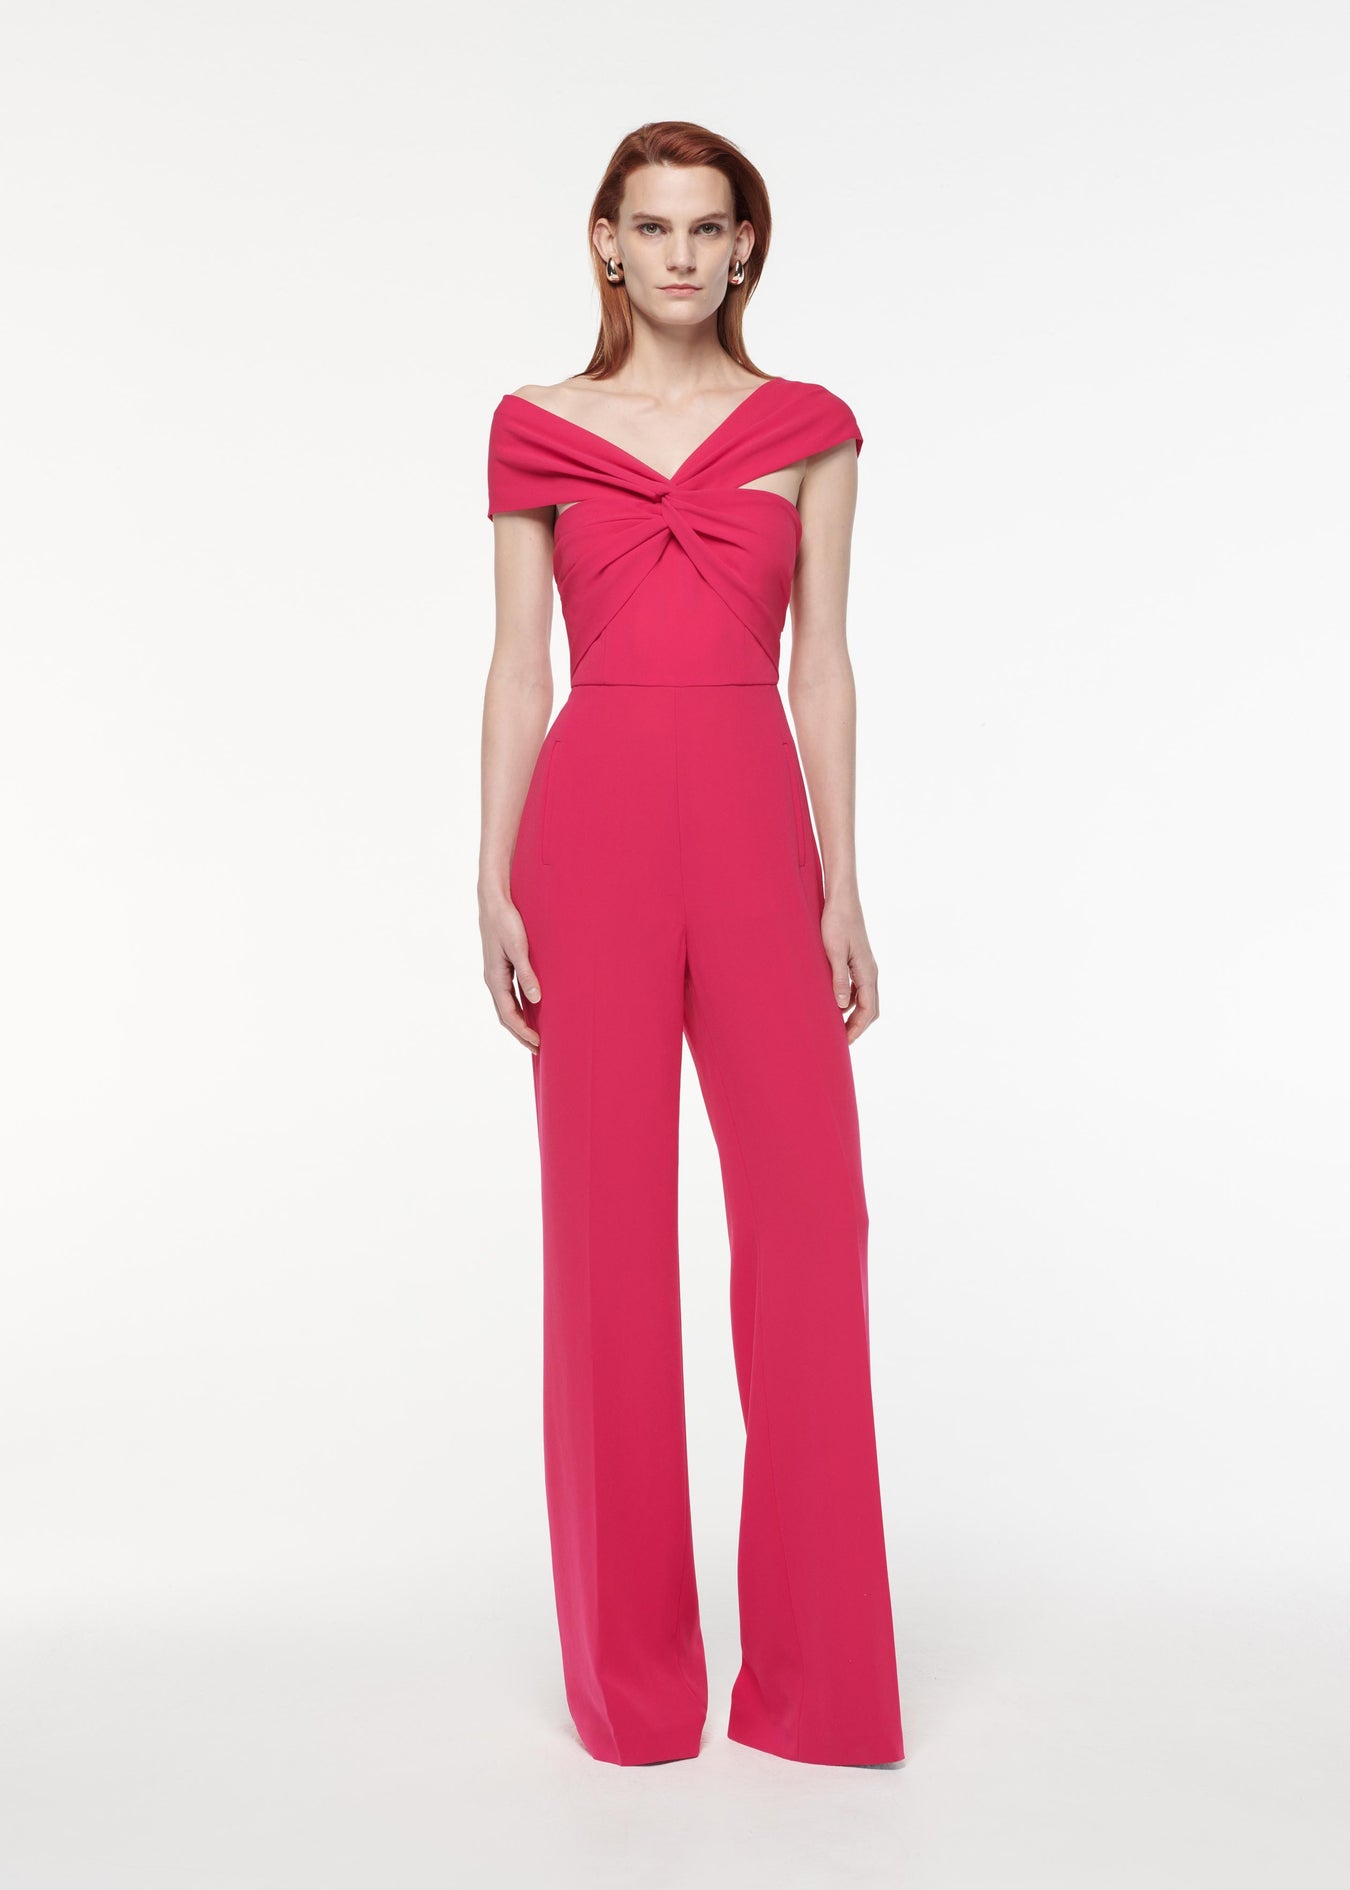 A photograph of a woman wearing aAsymmetric Light Cady Jumpsuit in Pink